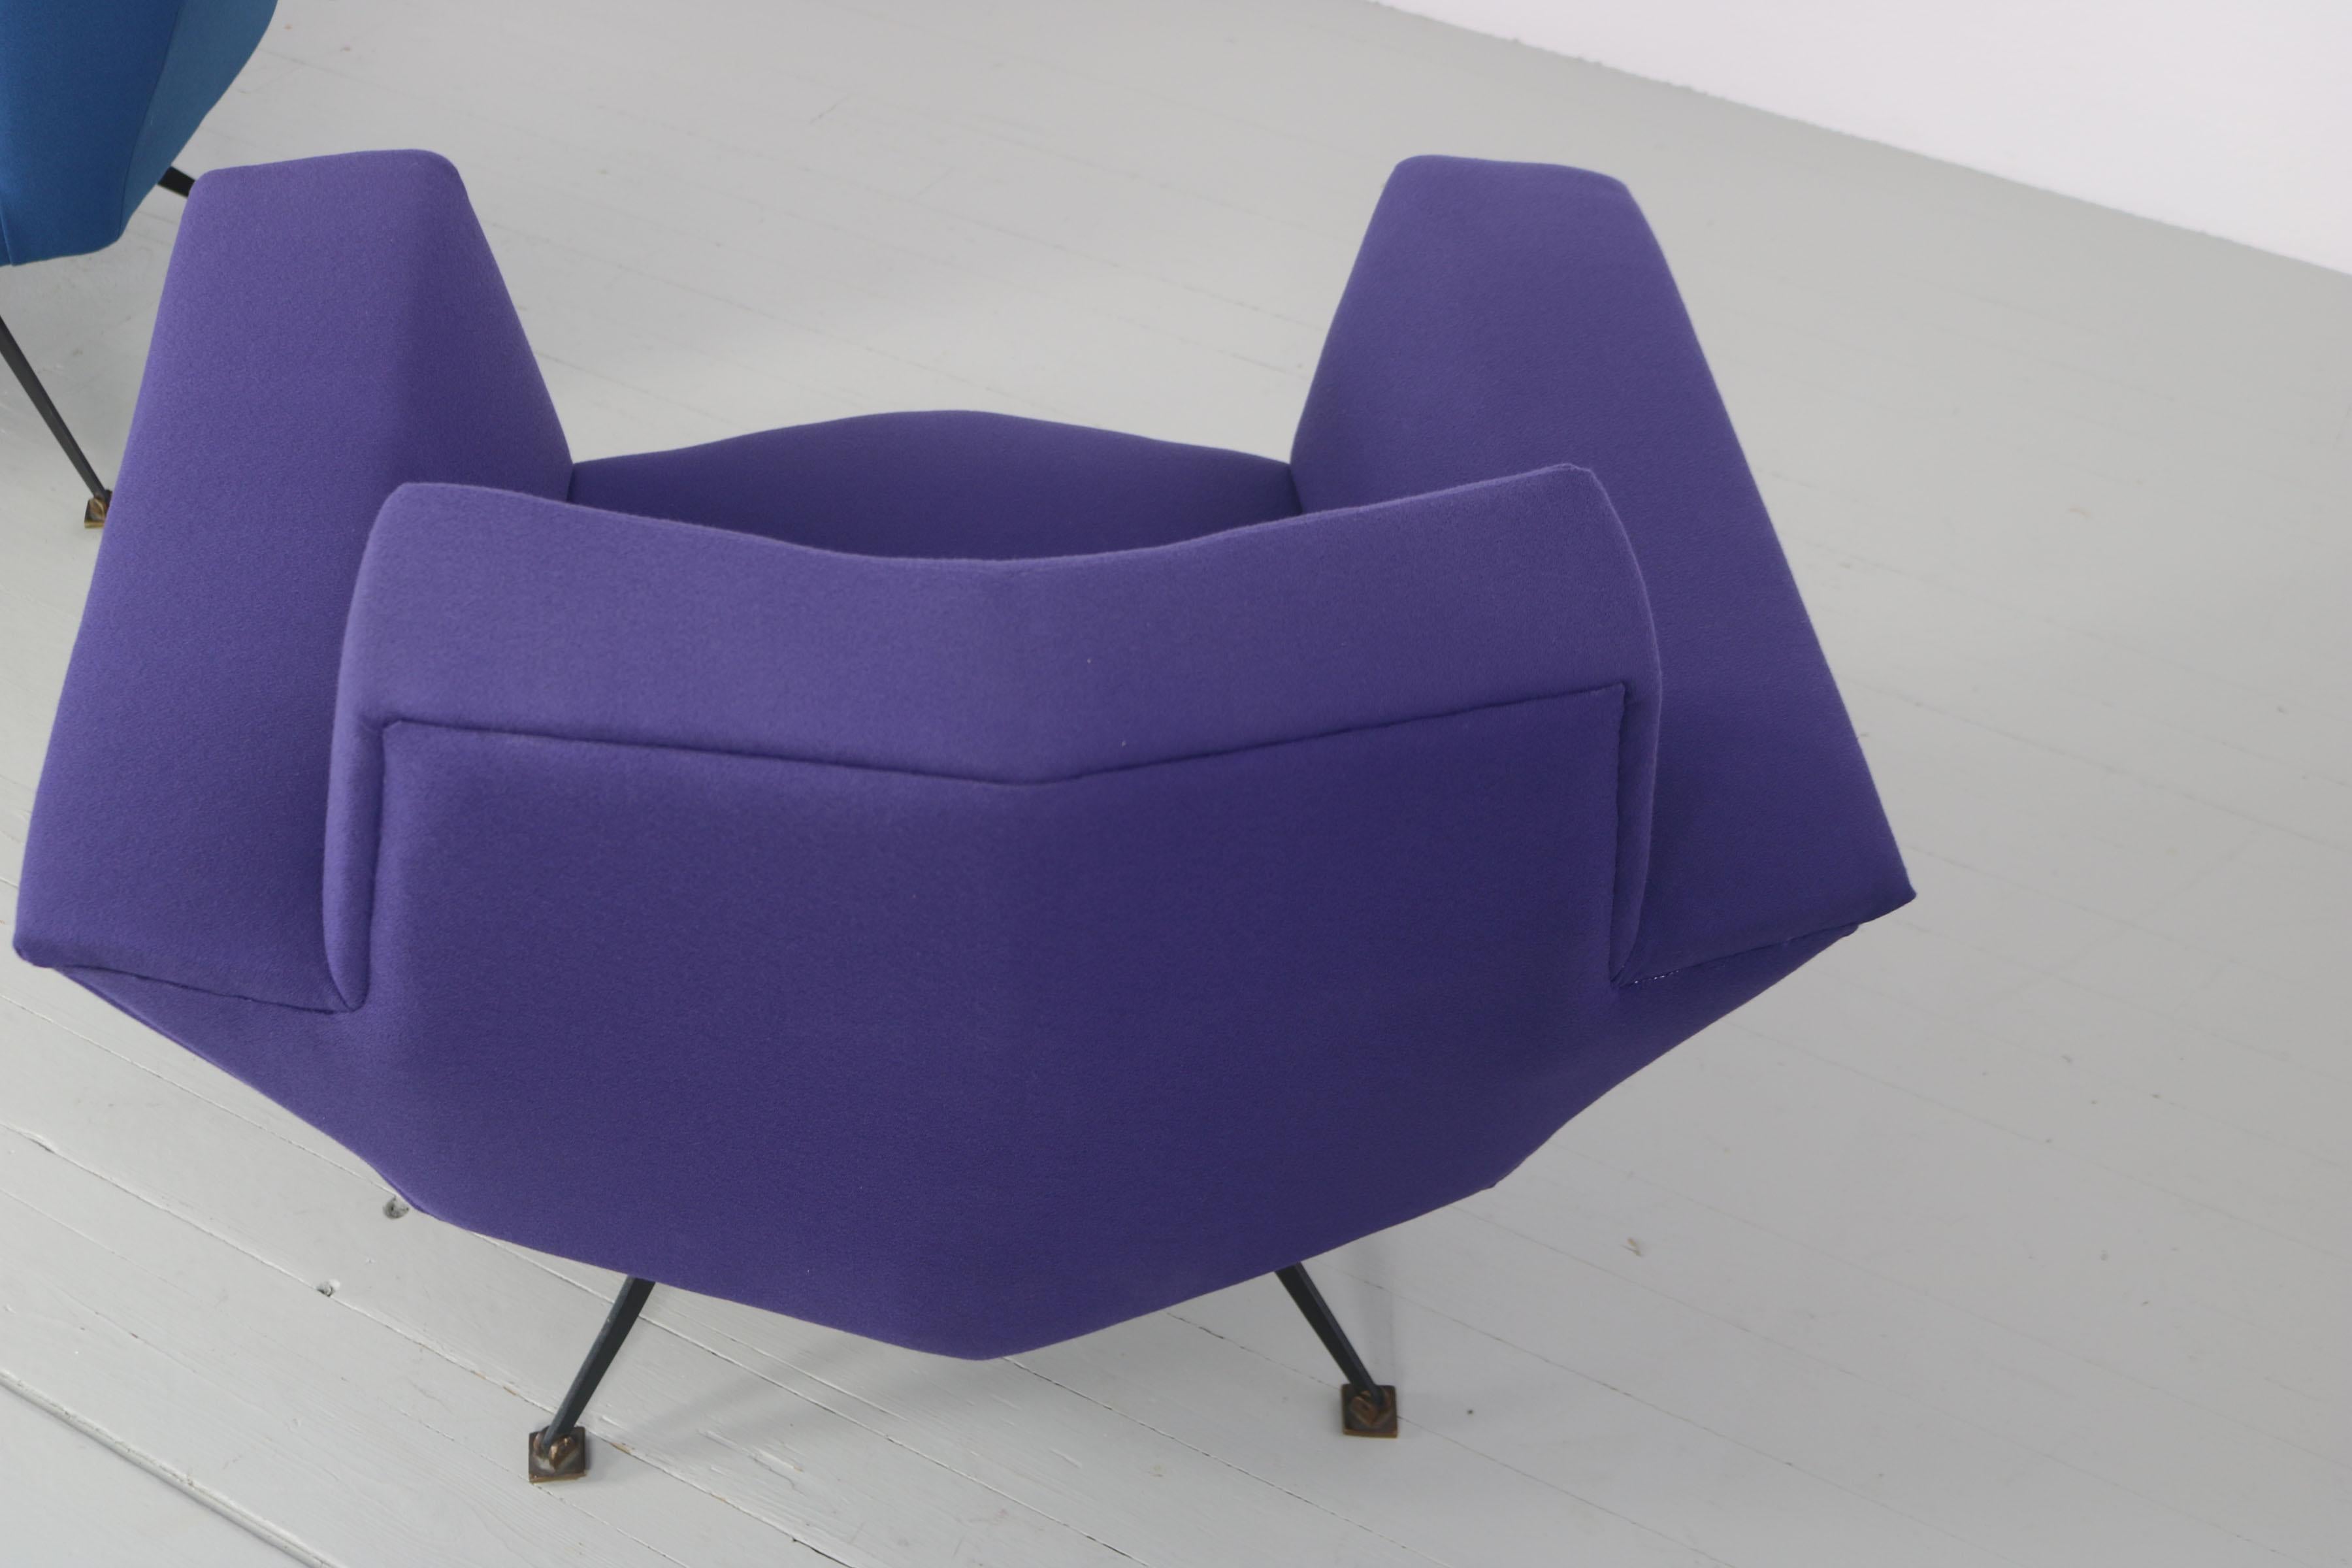 Pair of Italian Blue and Violet Armchairs by Lenzi, Studio Tecnico, Italy, 1950s For Sale 8